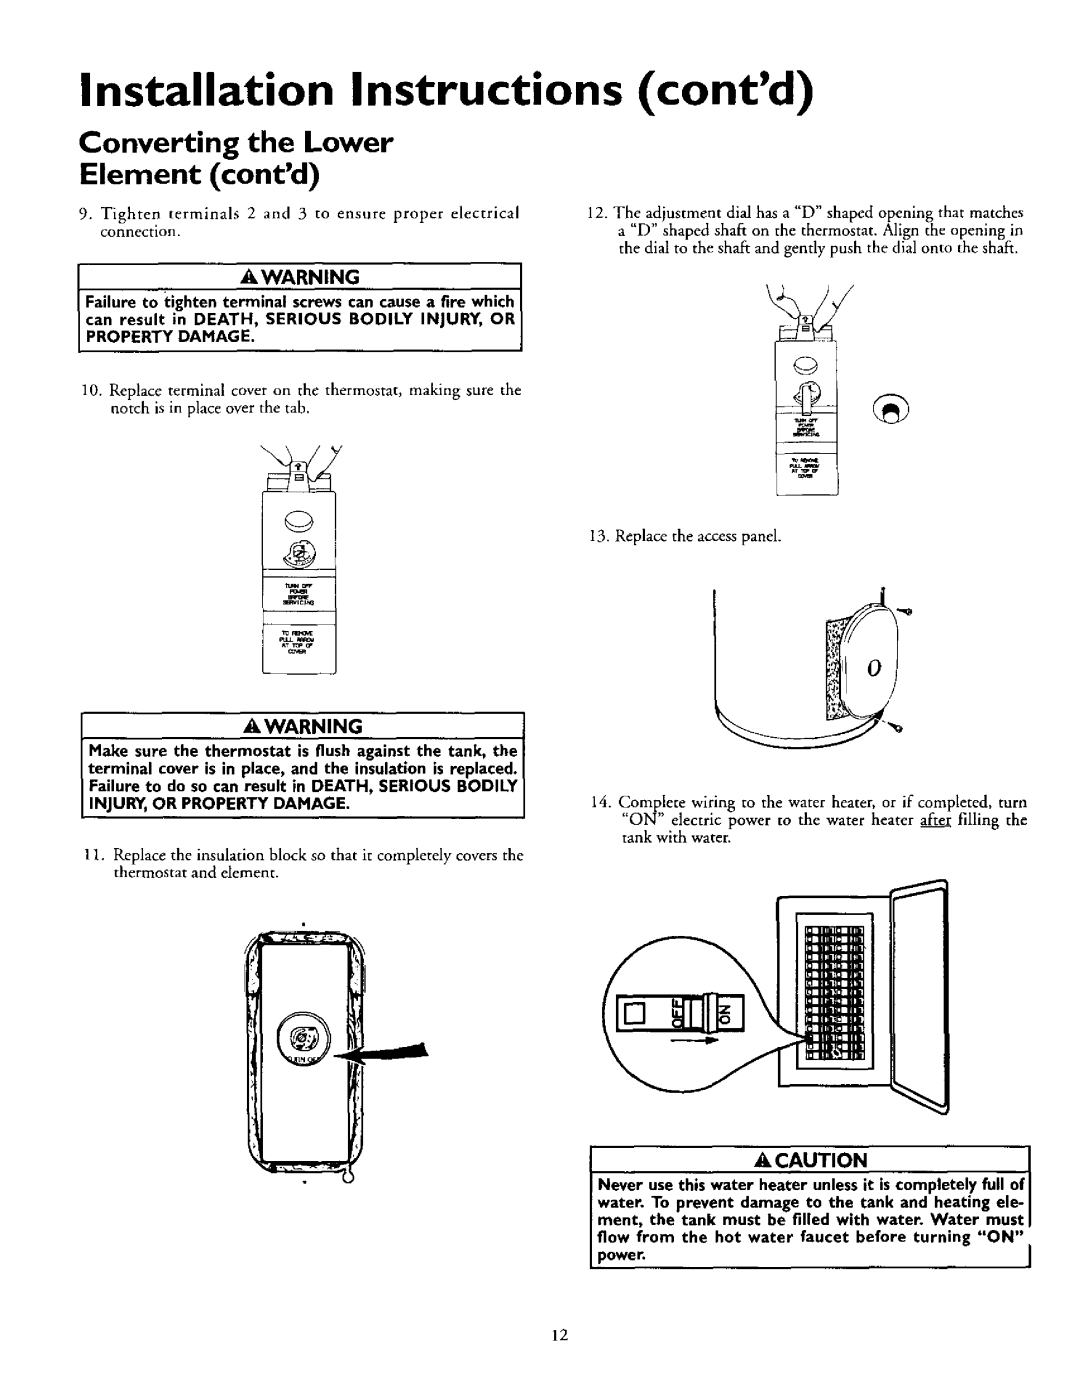 Kenmore 153.320892 HT, 153.320492 HT Converting, Lower, Element contd, Acaution, Awarning, Installation Instructions contd 